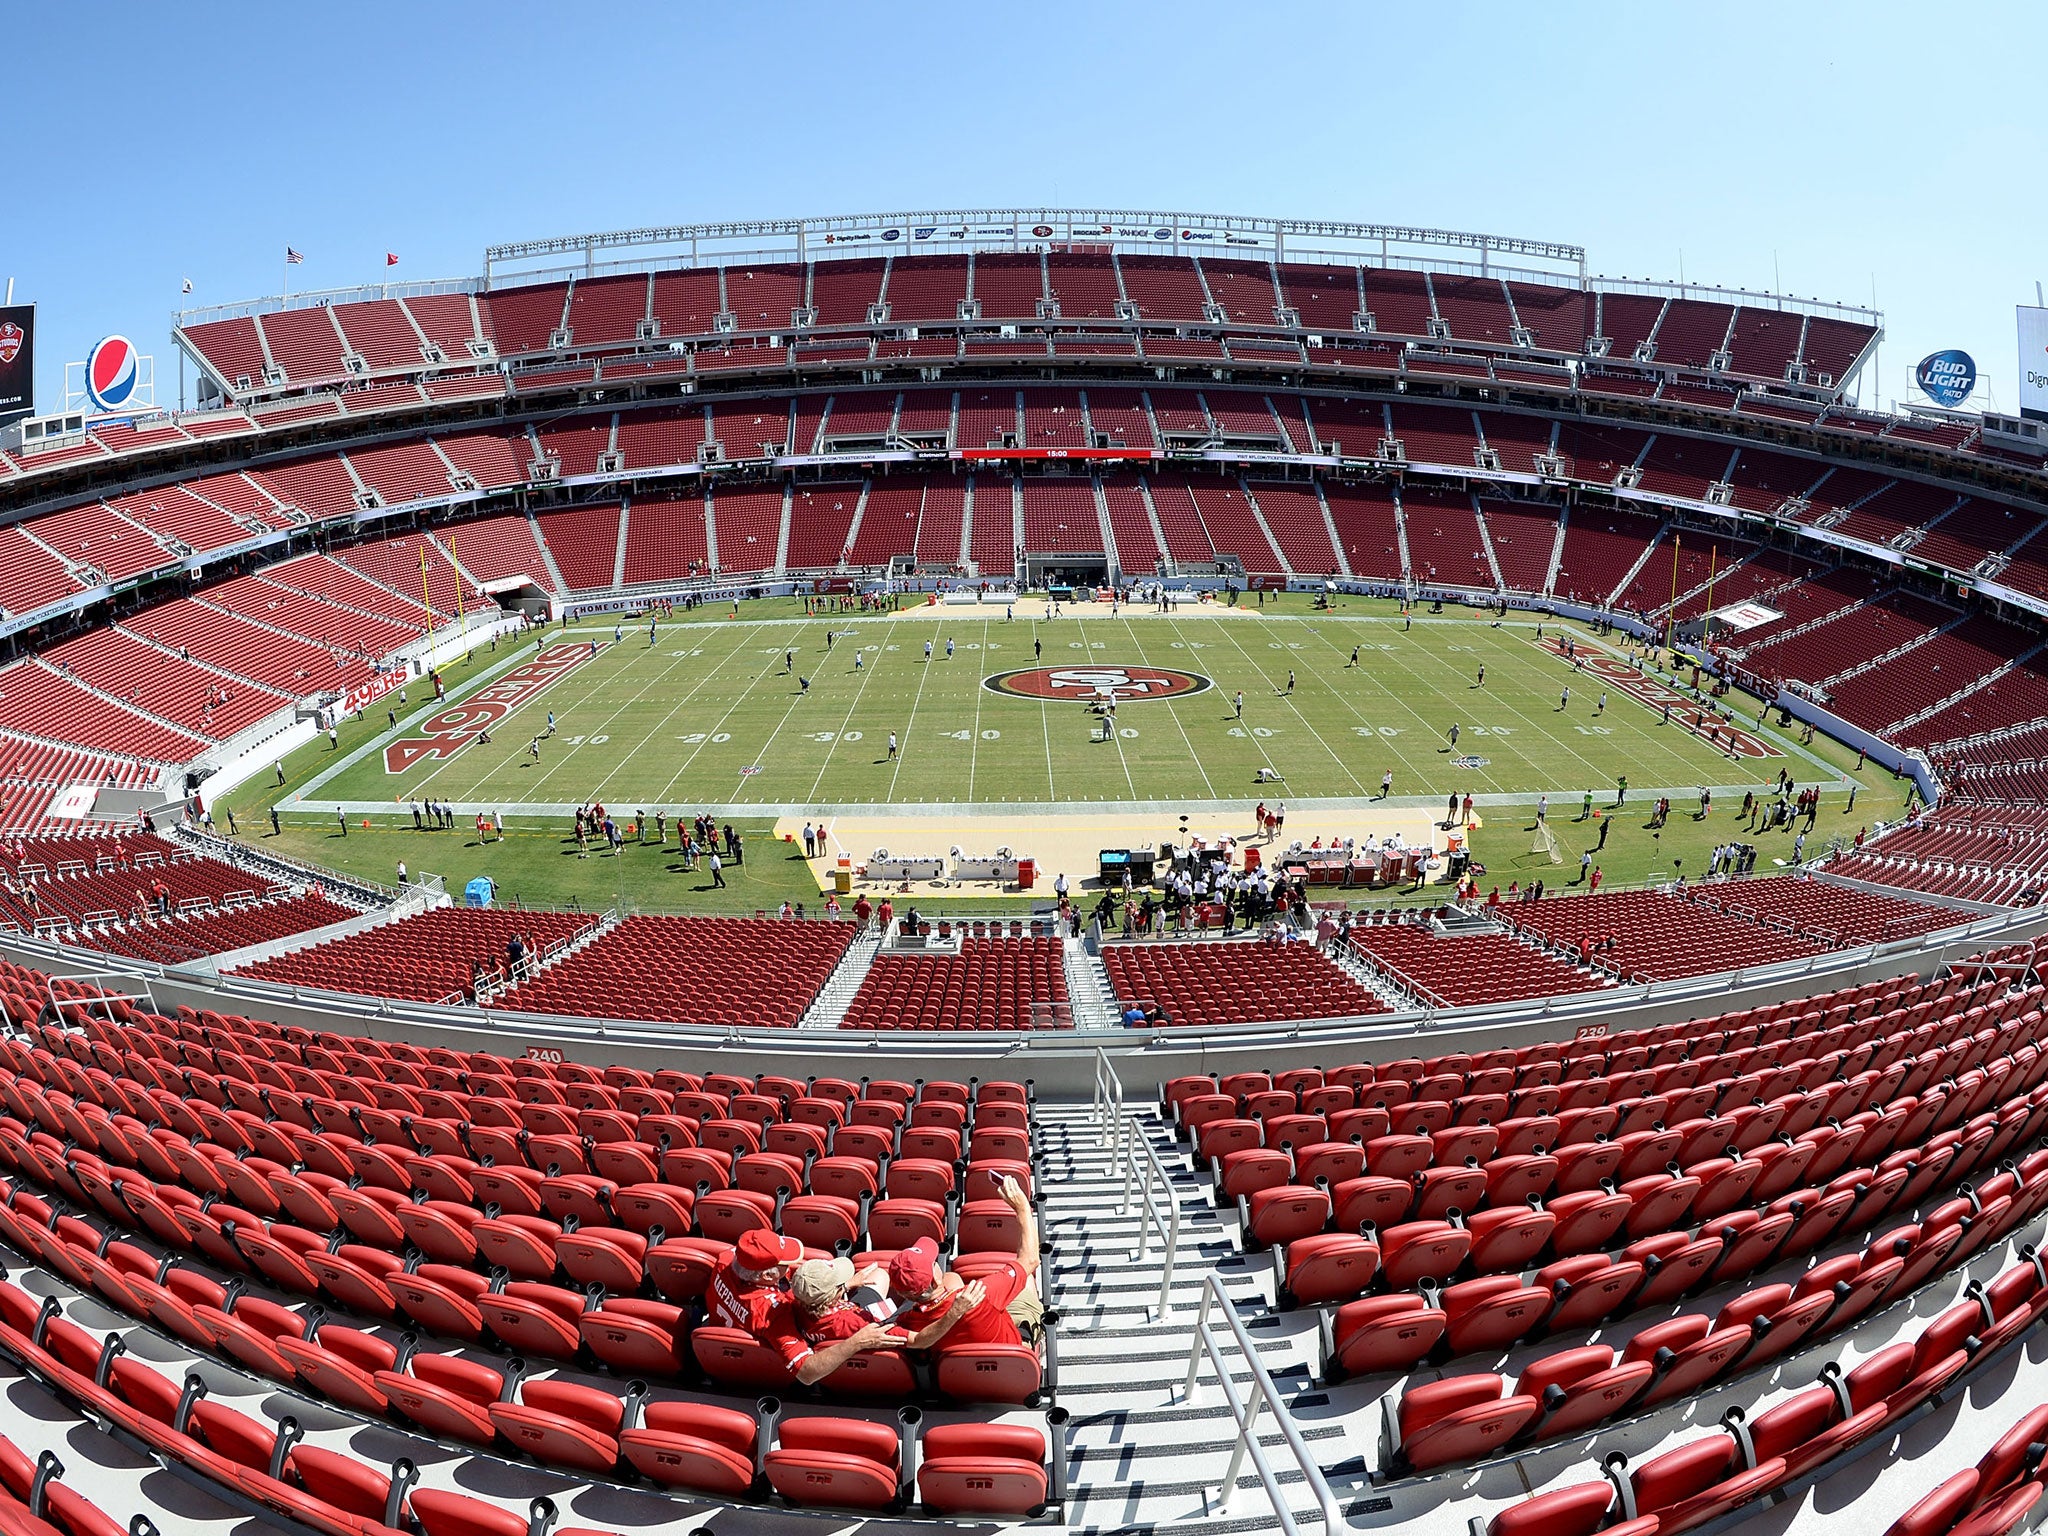 Levi's Field, California will play host to Super Bowl 50